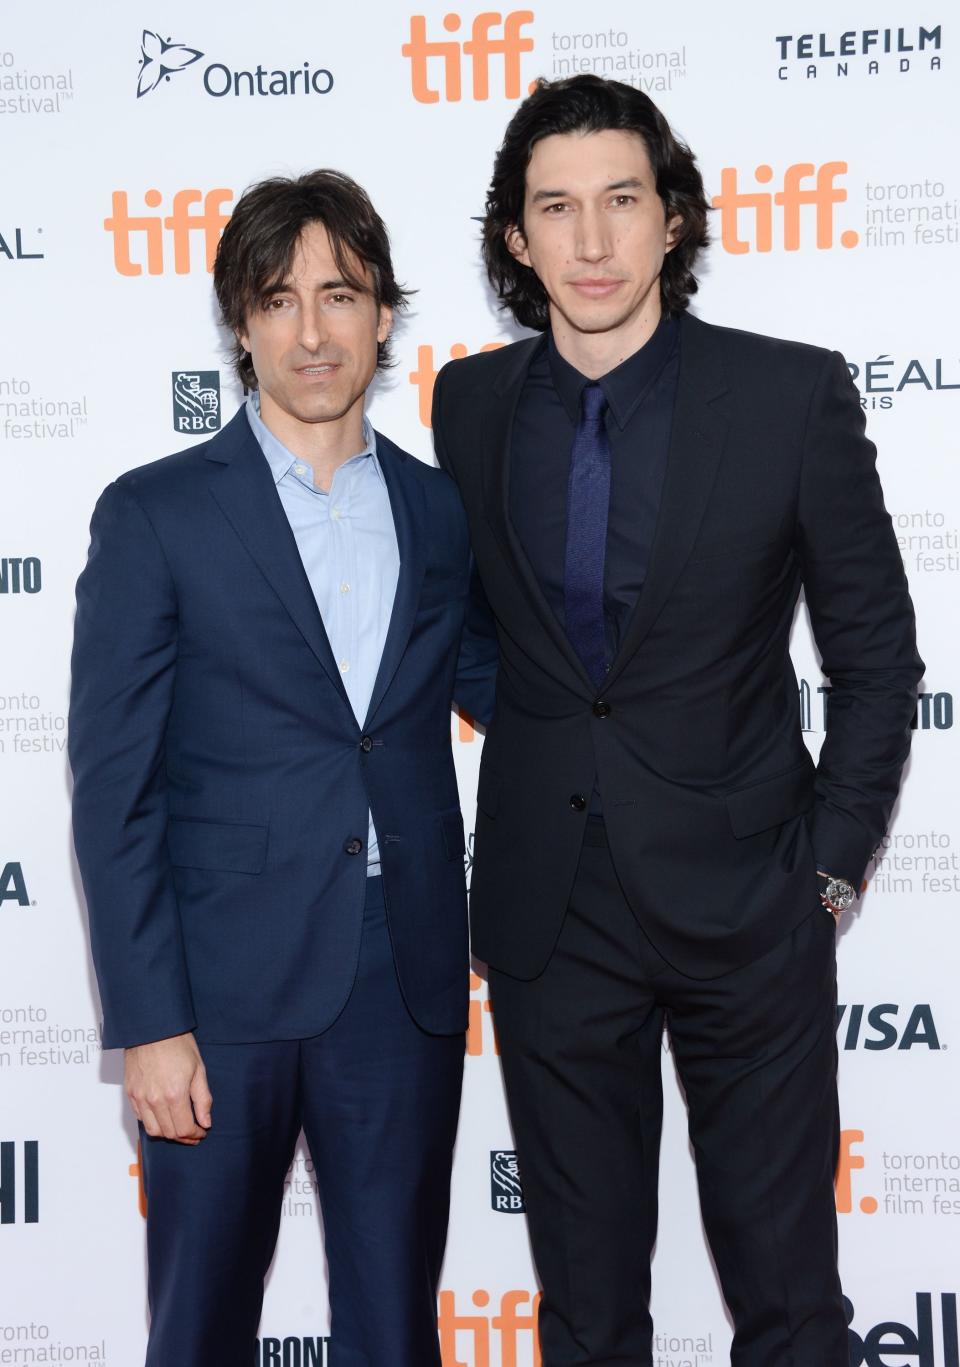 Director Noah Baumbach, left, and actor Adam Driver attend the "While We're Young" premiere during the Toronto International Film Festival, in Toronto2014 TIFF - "While We're Young" Premiere, Toronto, Canada - 6 Sep 2014